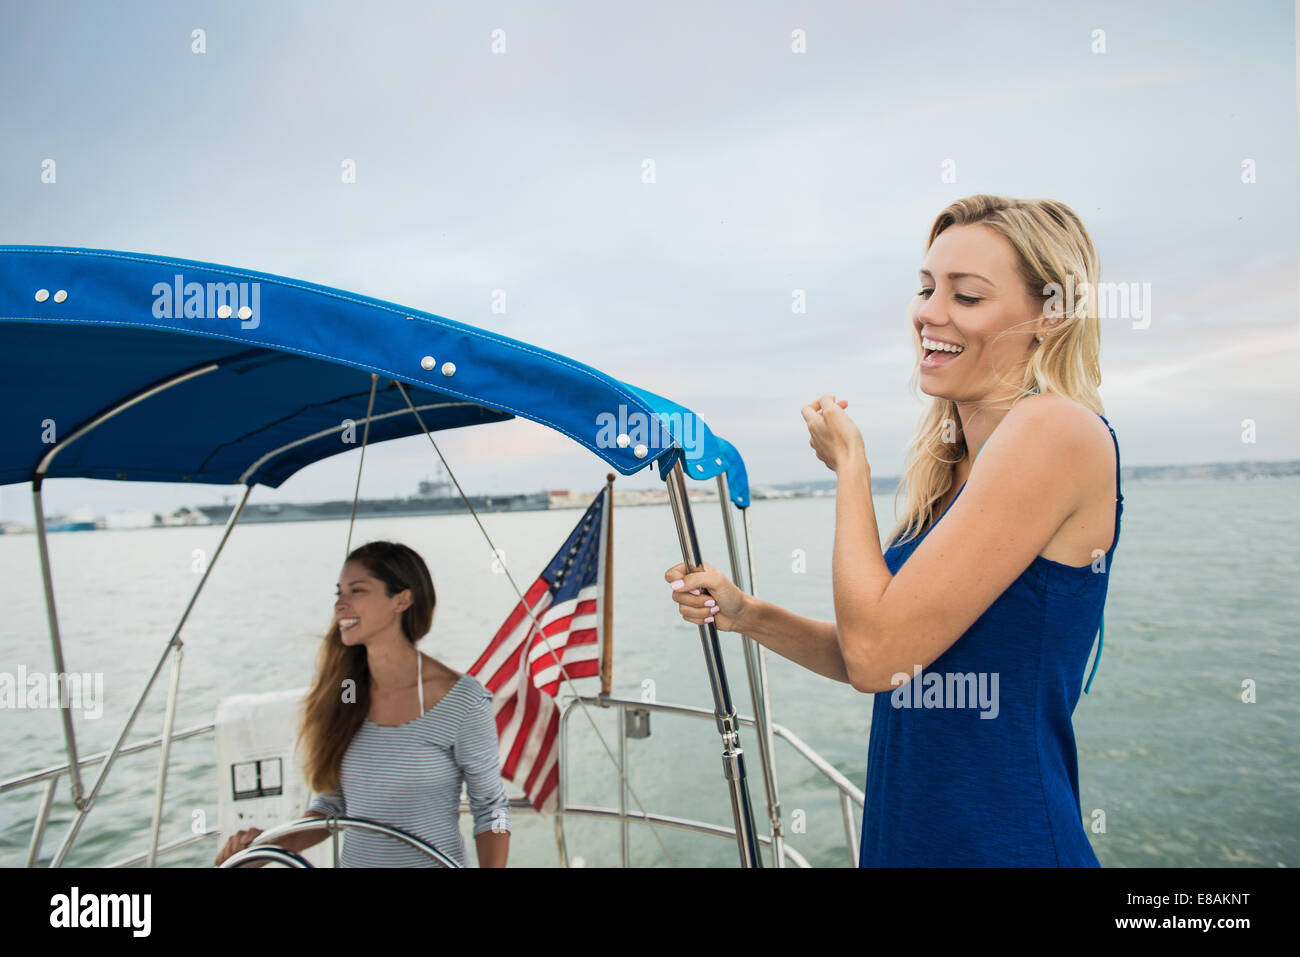 Two women on sailing boat laughing Stock Photo